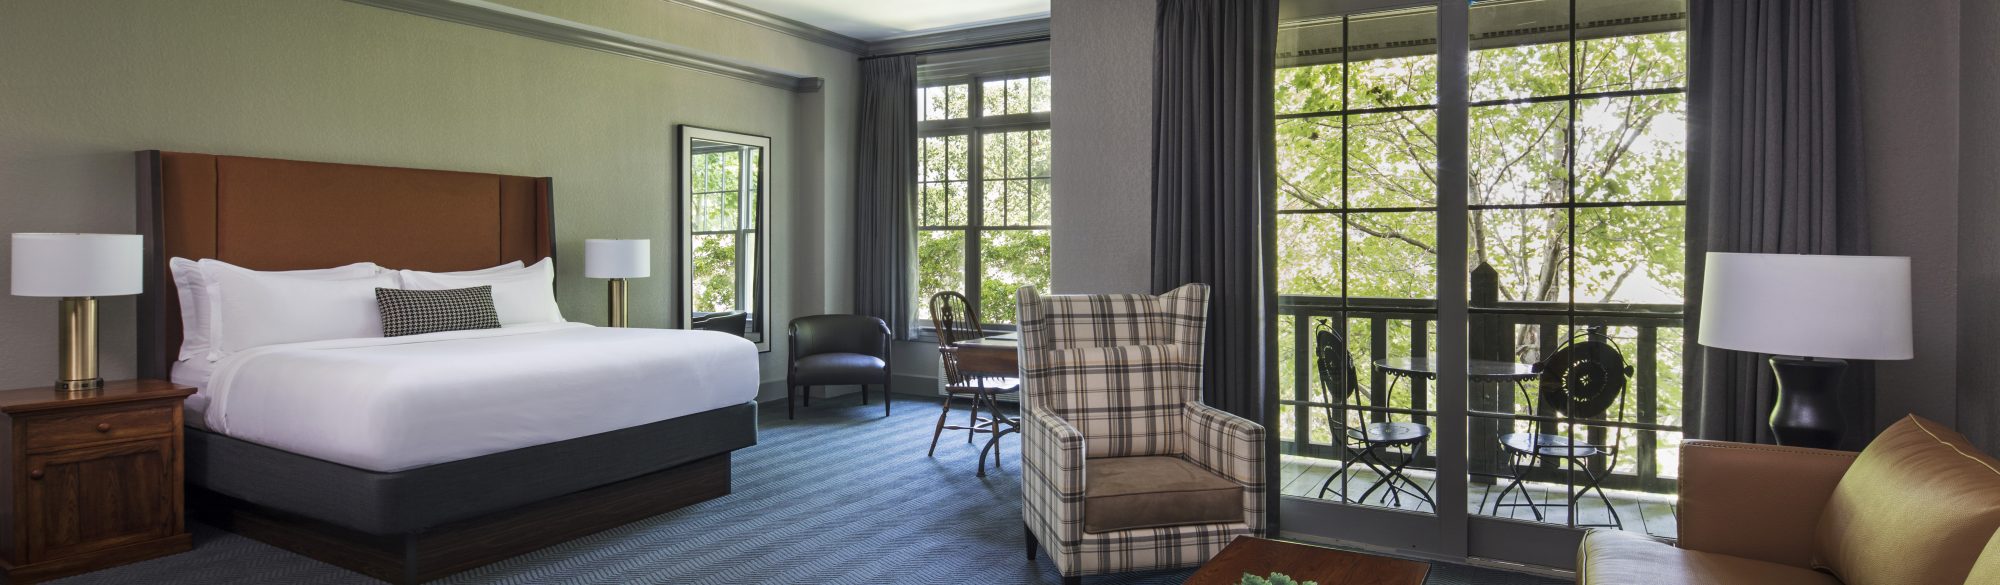 The Lodge at Ballantyne King Guestroom